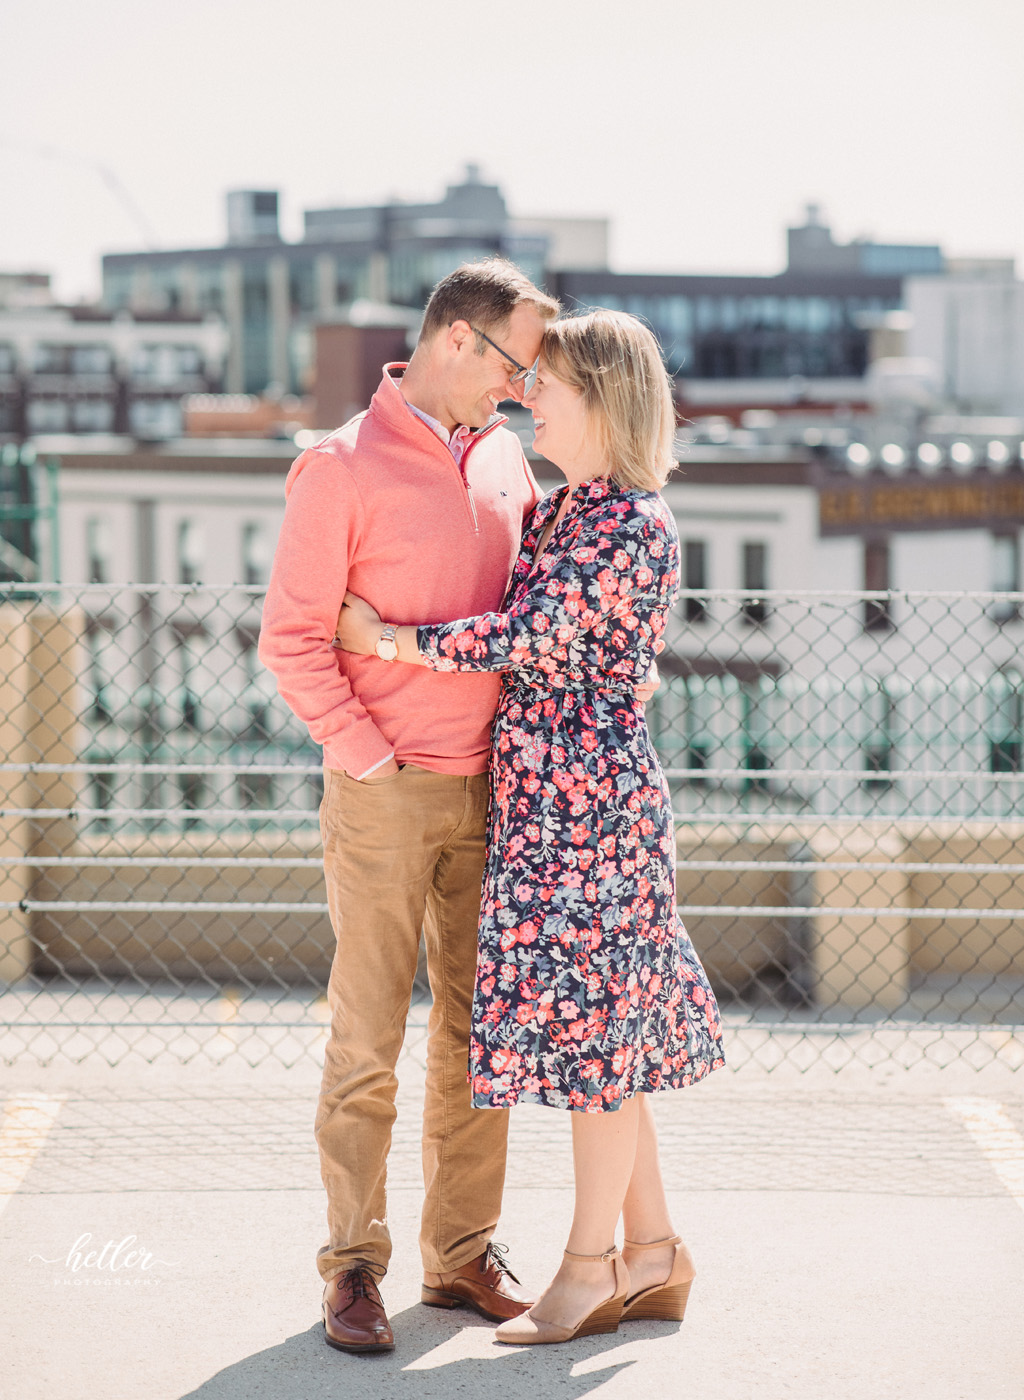 Downtown Grand Rapids Michigan parking garage rooftop family photo session